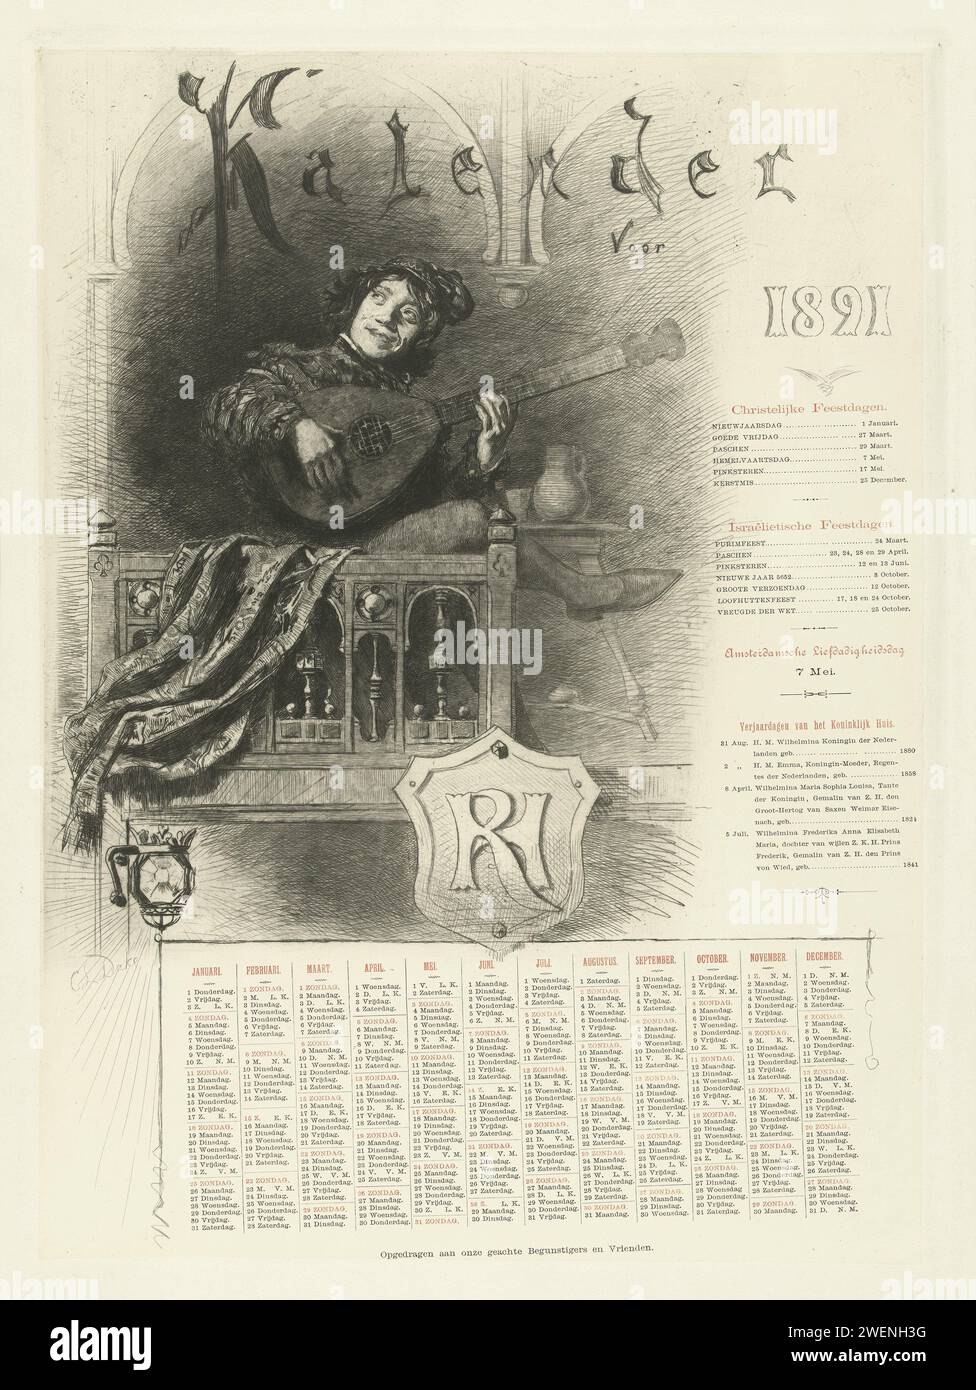 Calendar before 1891 with cheerful musician, Carel Lodewijk Dake, after Frans Hals, 1890 - 1891 print Calendar before 1891 with cheerful man, dressed in seventeenth century costume, who plays on a lute. A few holidays are mentioned specifically and the moon positions are mentioned with abbreviations at the calendar, except for months and days. On a shield is a monogram R&H that refers to the organization that the calendar instructs to its beneficiaries and friends, according to the inscription.  paper. etching / drypoint / letterpress printing calendar, almanac. lute, and special forms of lute Stock Photo